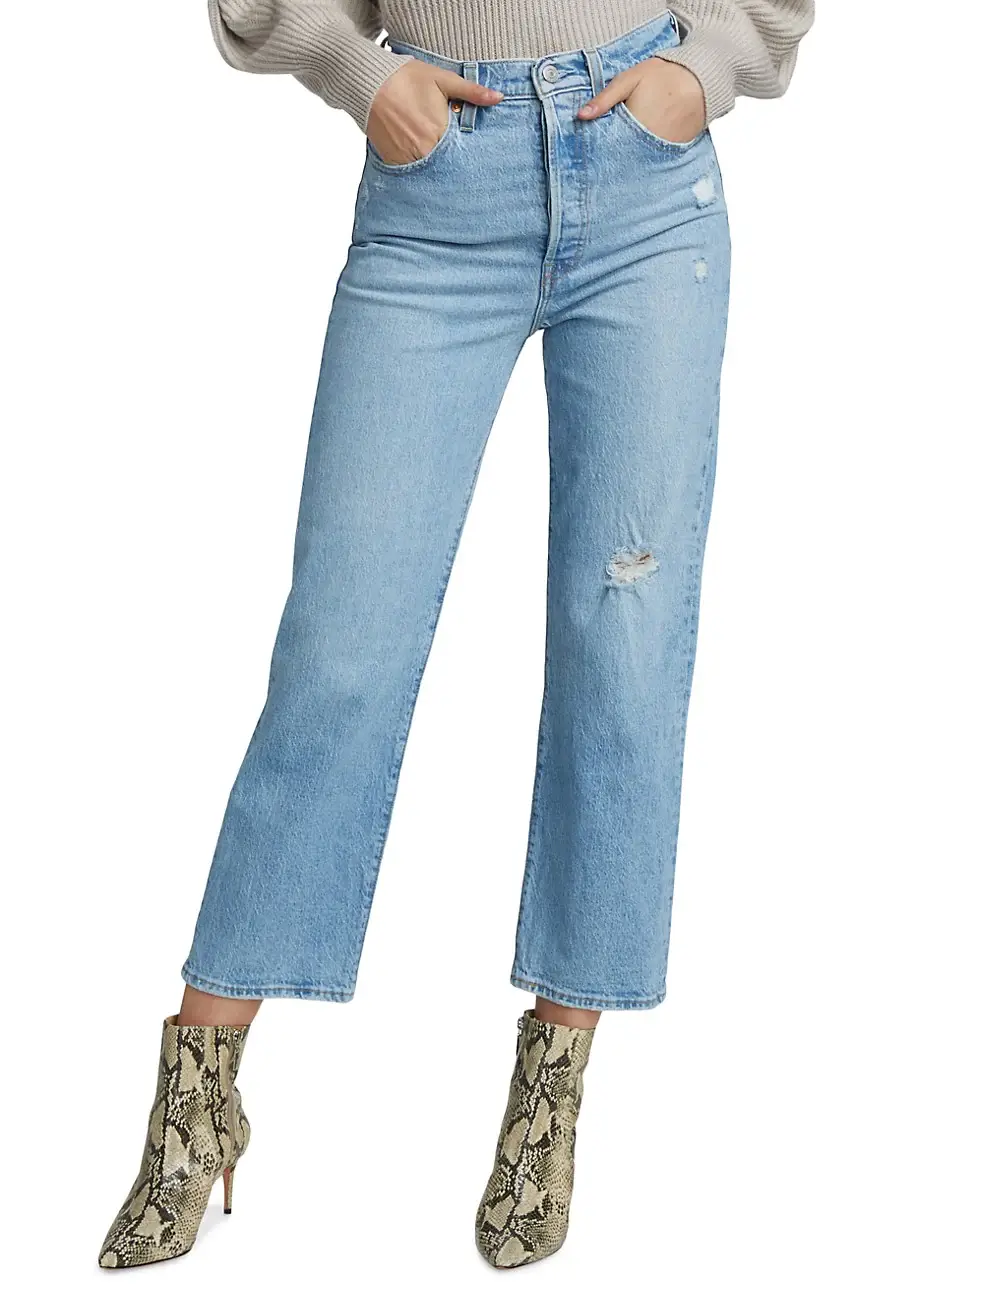 LEVI'S Ribcage Straight Ankle Jeans